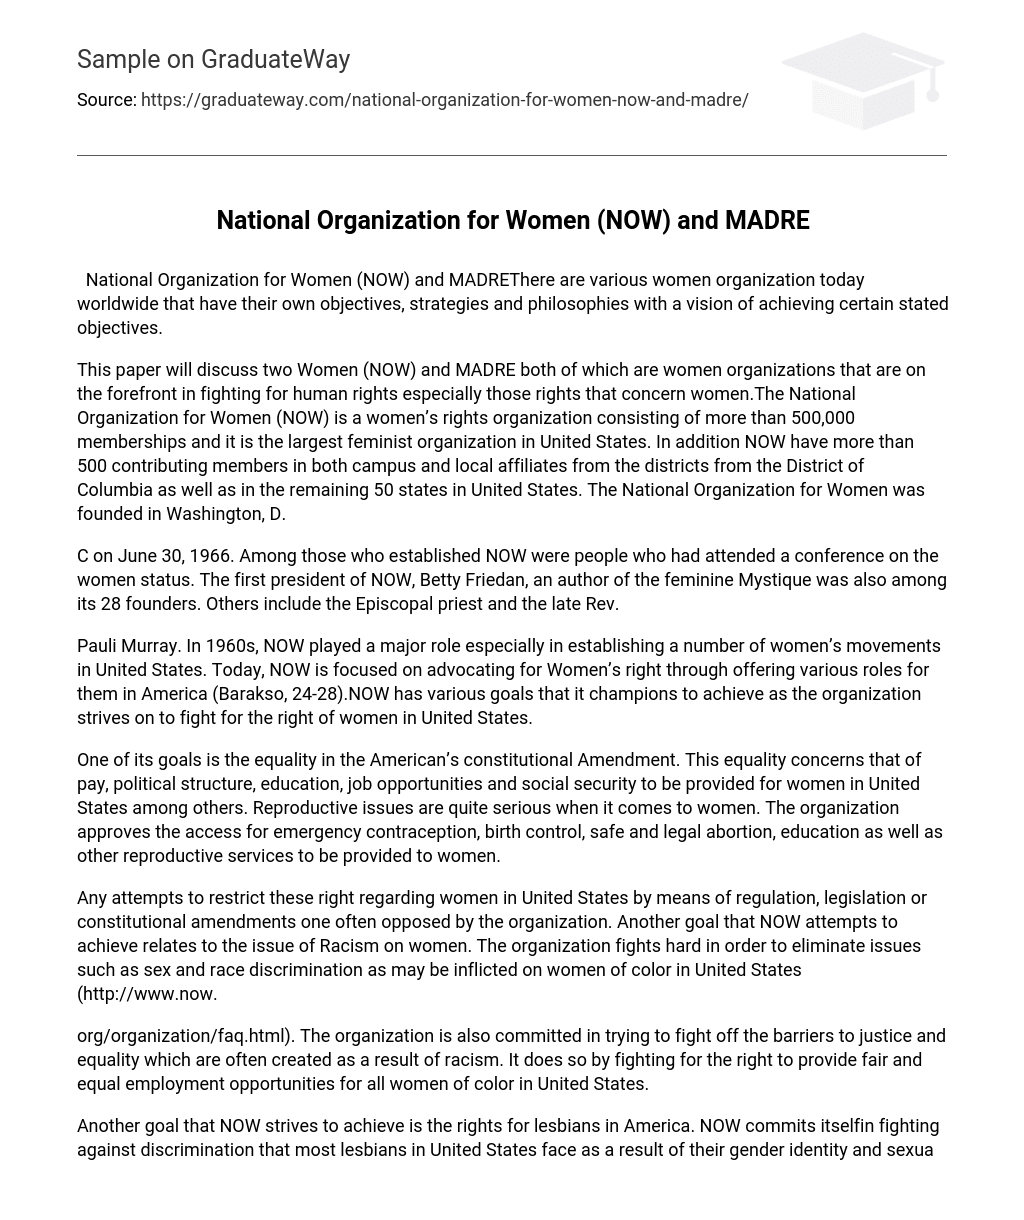 National Organization for Women (NOW) and MADRE